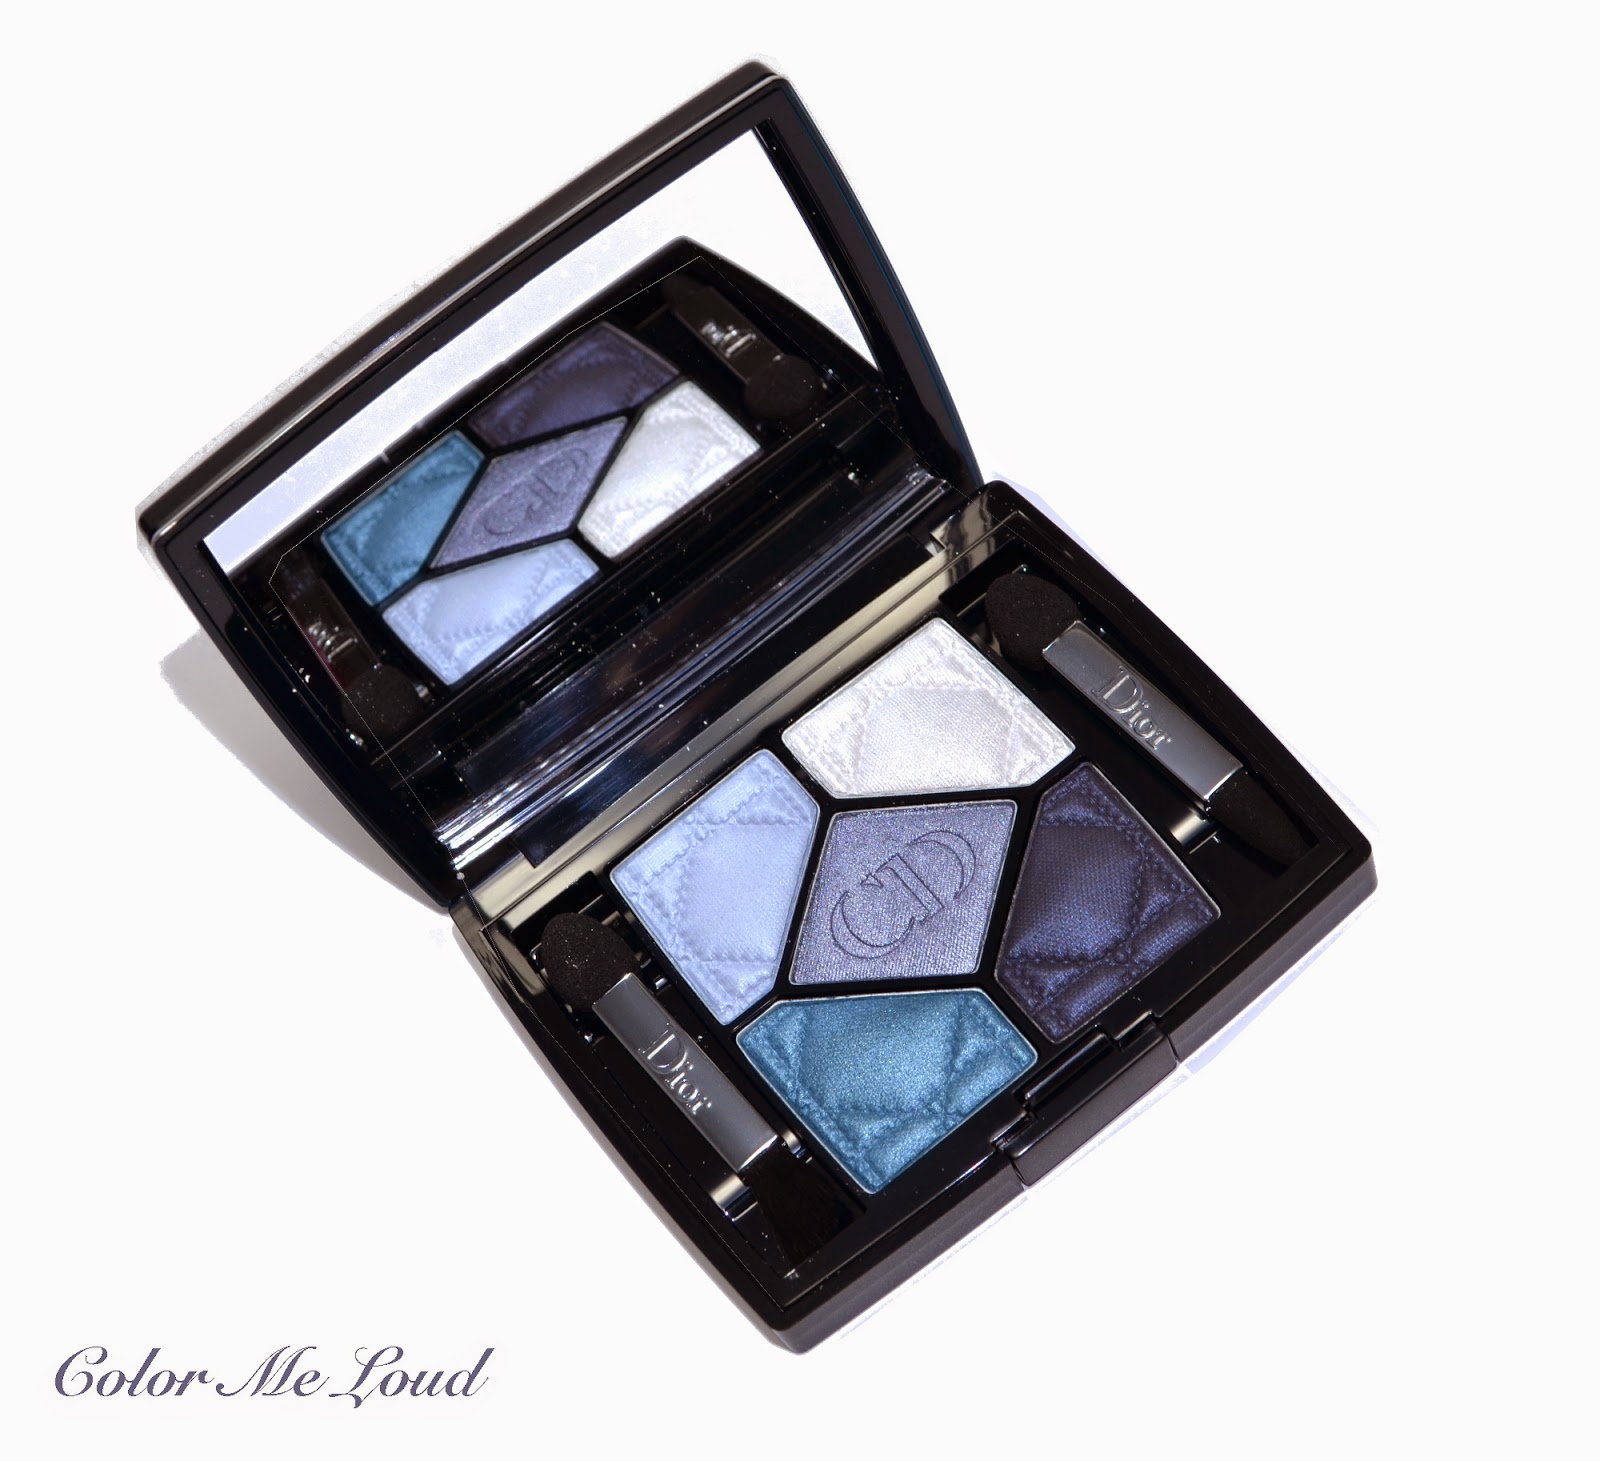 Dior Fall 2014 5 Couleurs Collection Review – The Pink Millennial